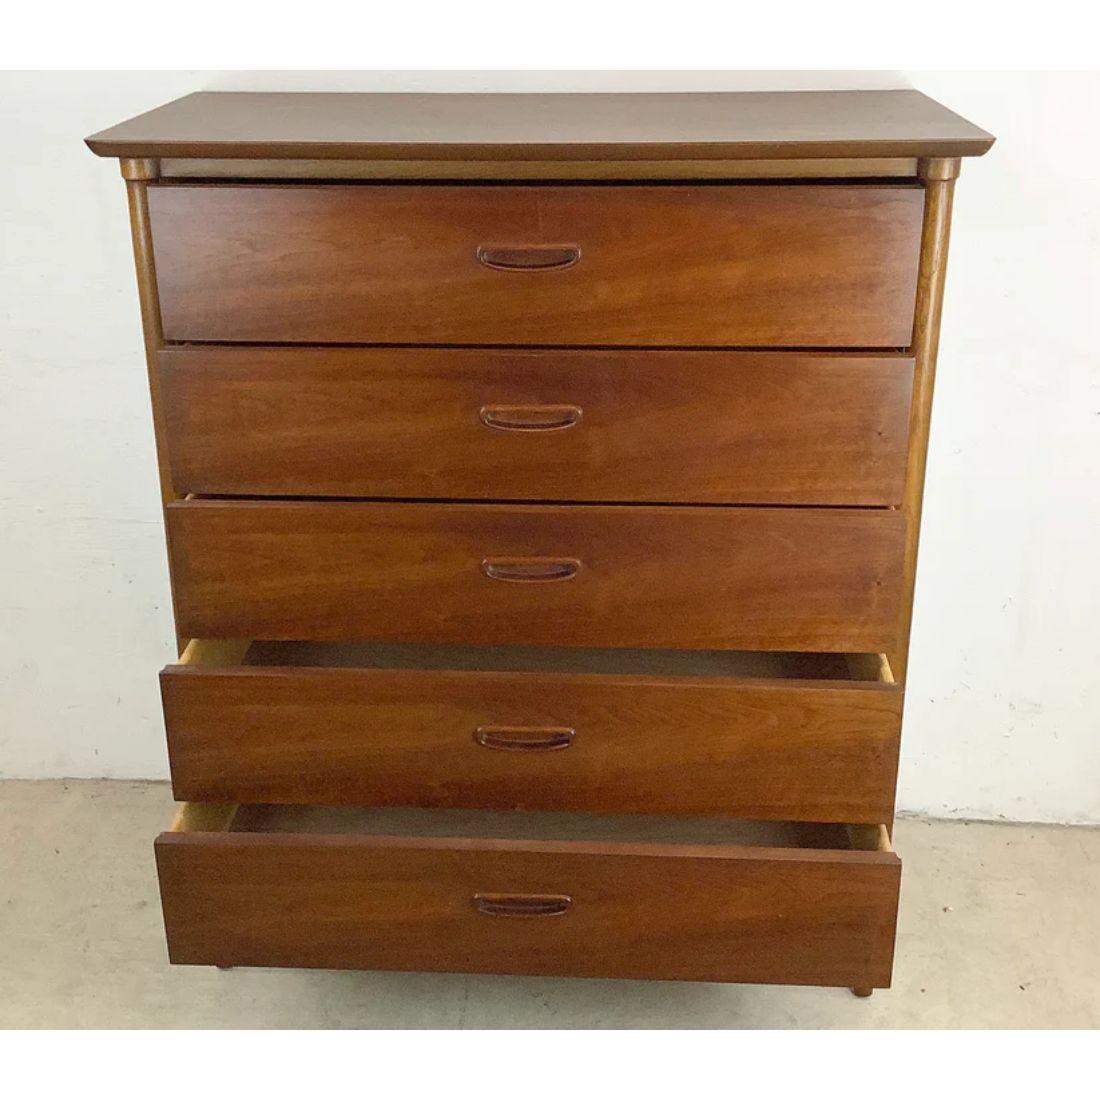 Experience the epitome of midcentury charm with this Mid-Century Modern Highboy Dresser by Lane, available now.

Crafted with exceptional attention to detail, this dresser showcases timeless elegance and impeccable craftsmanship. The clean lines,